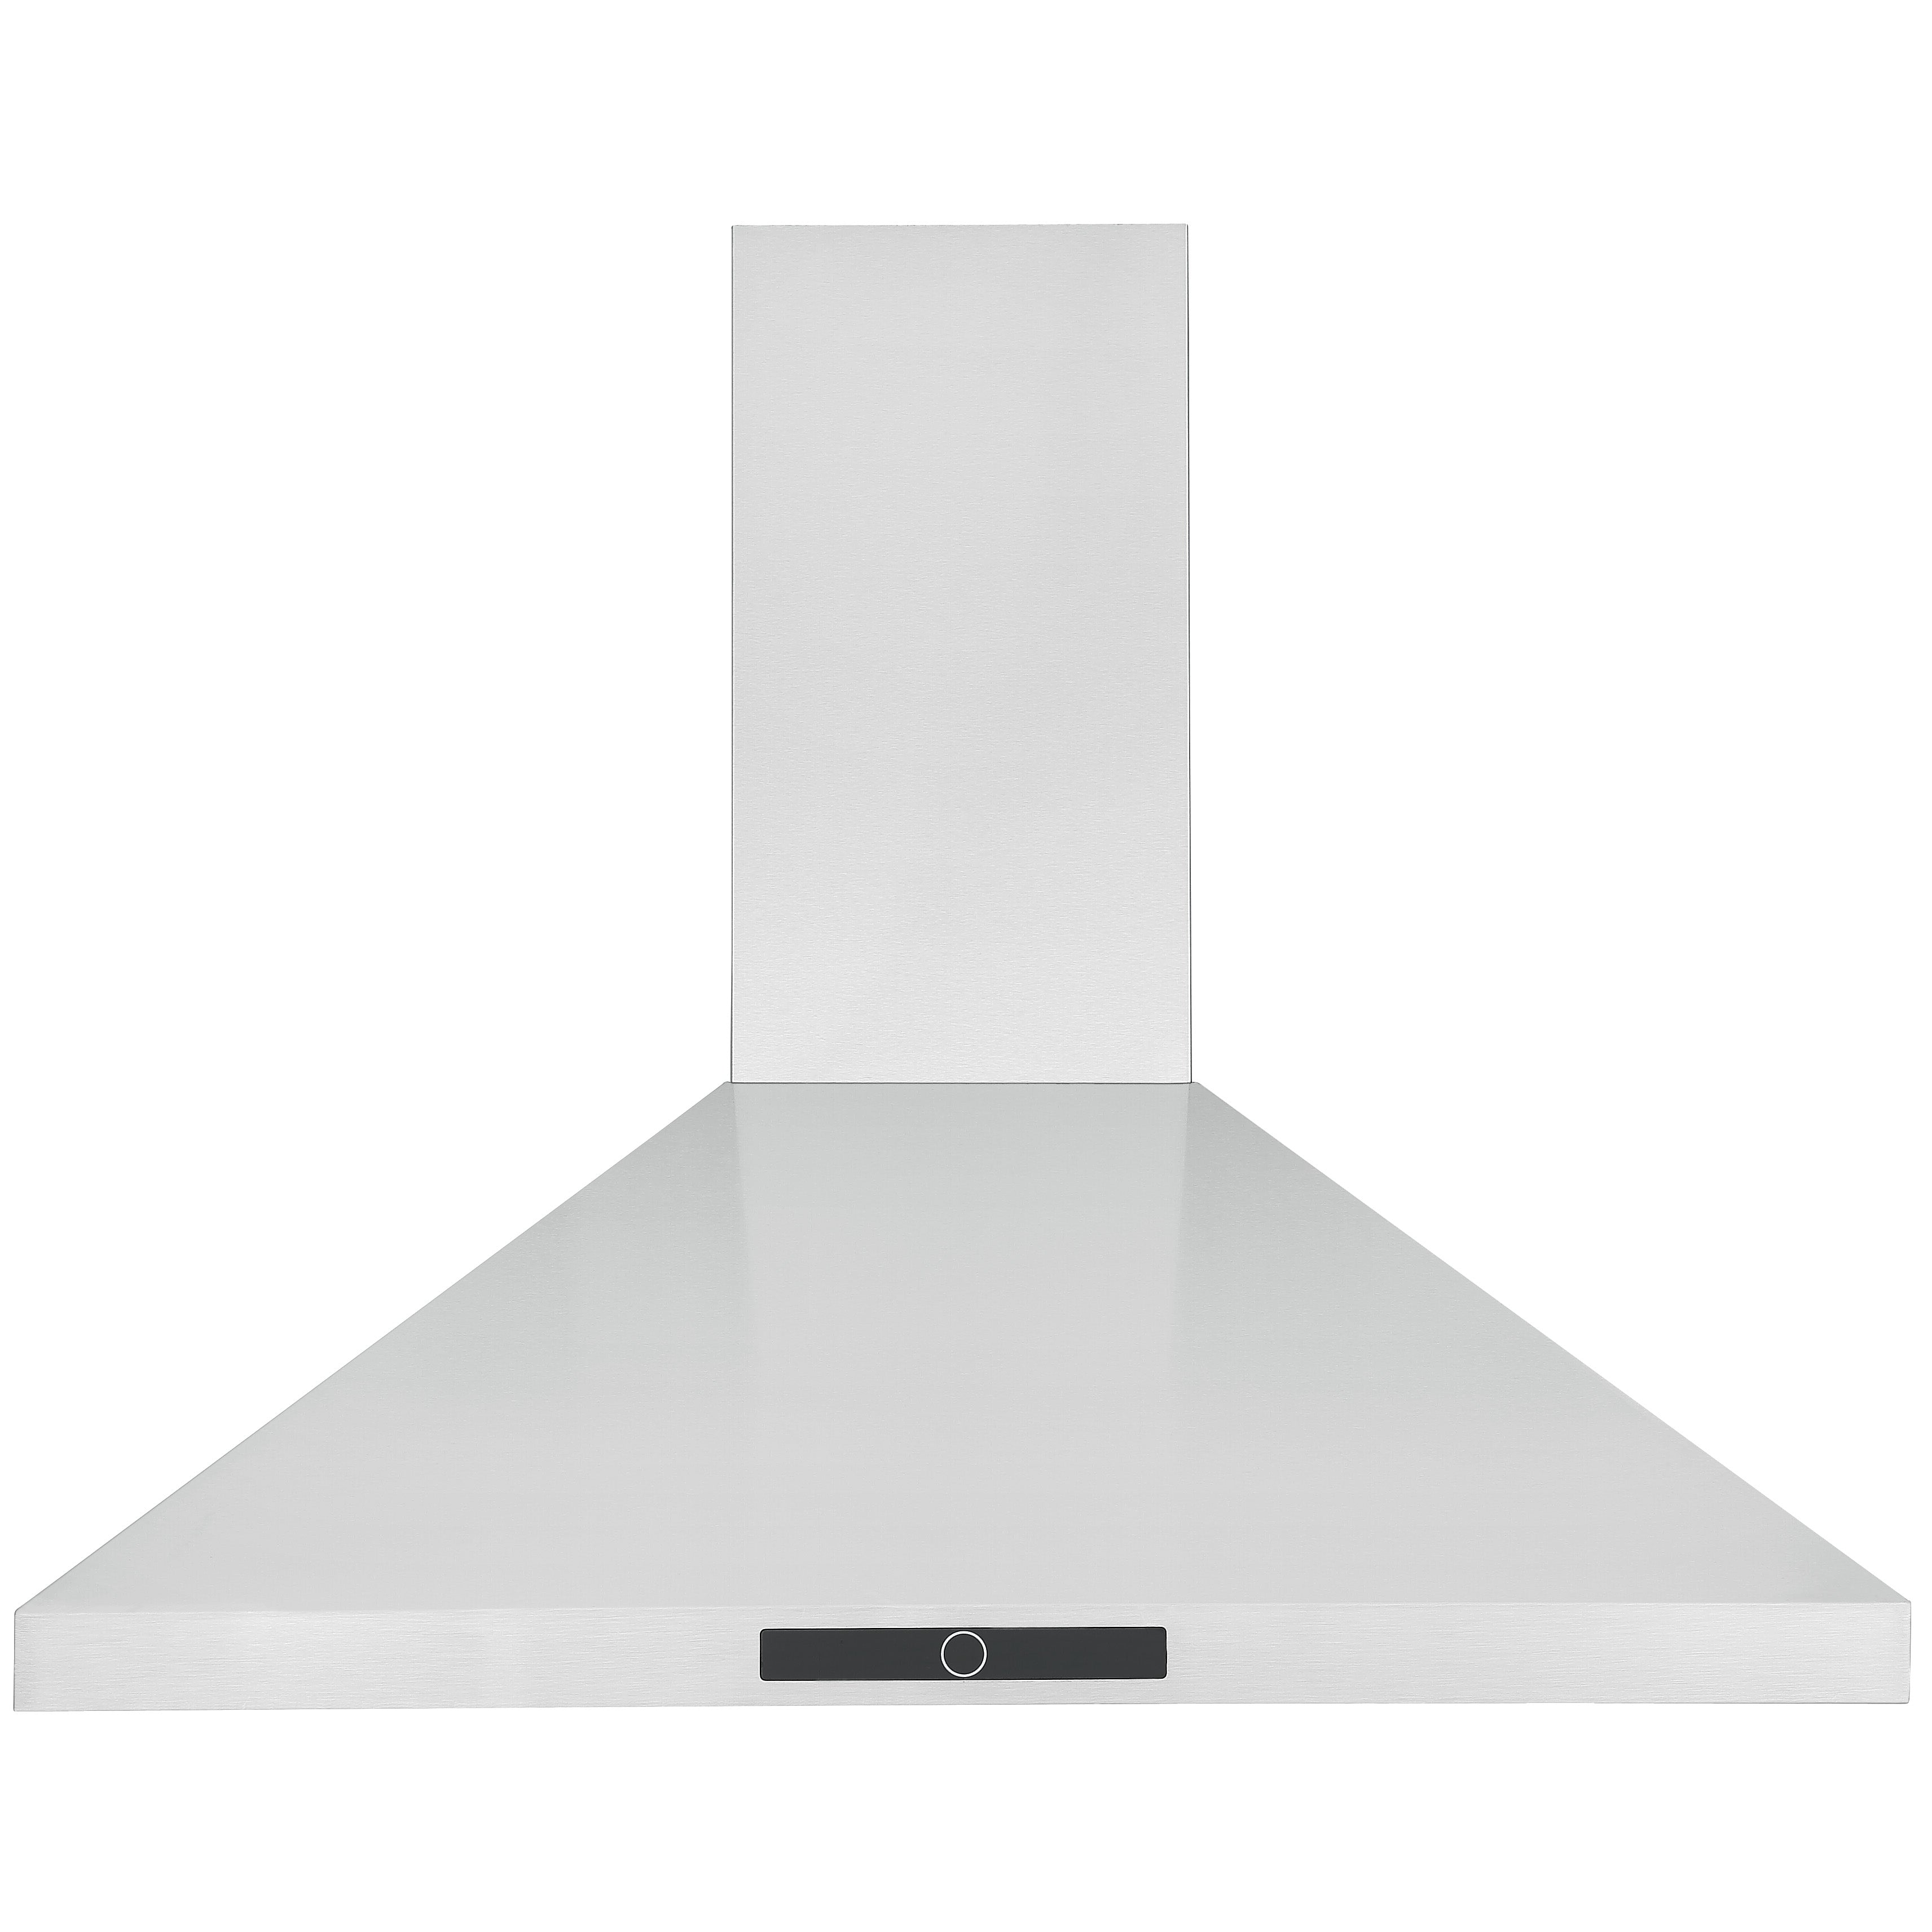 Ancona AN-1542 30 in. Stainless Steel Convertible Wall-Mounted Pyramid Range Hood